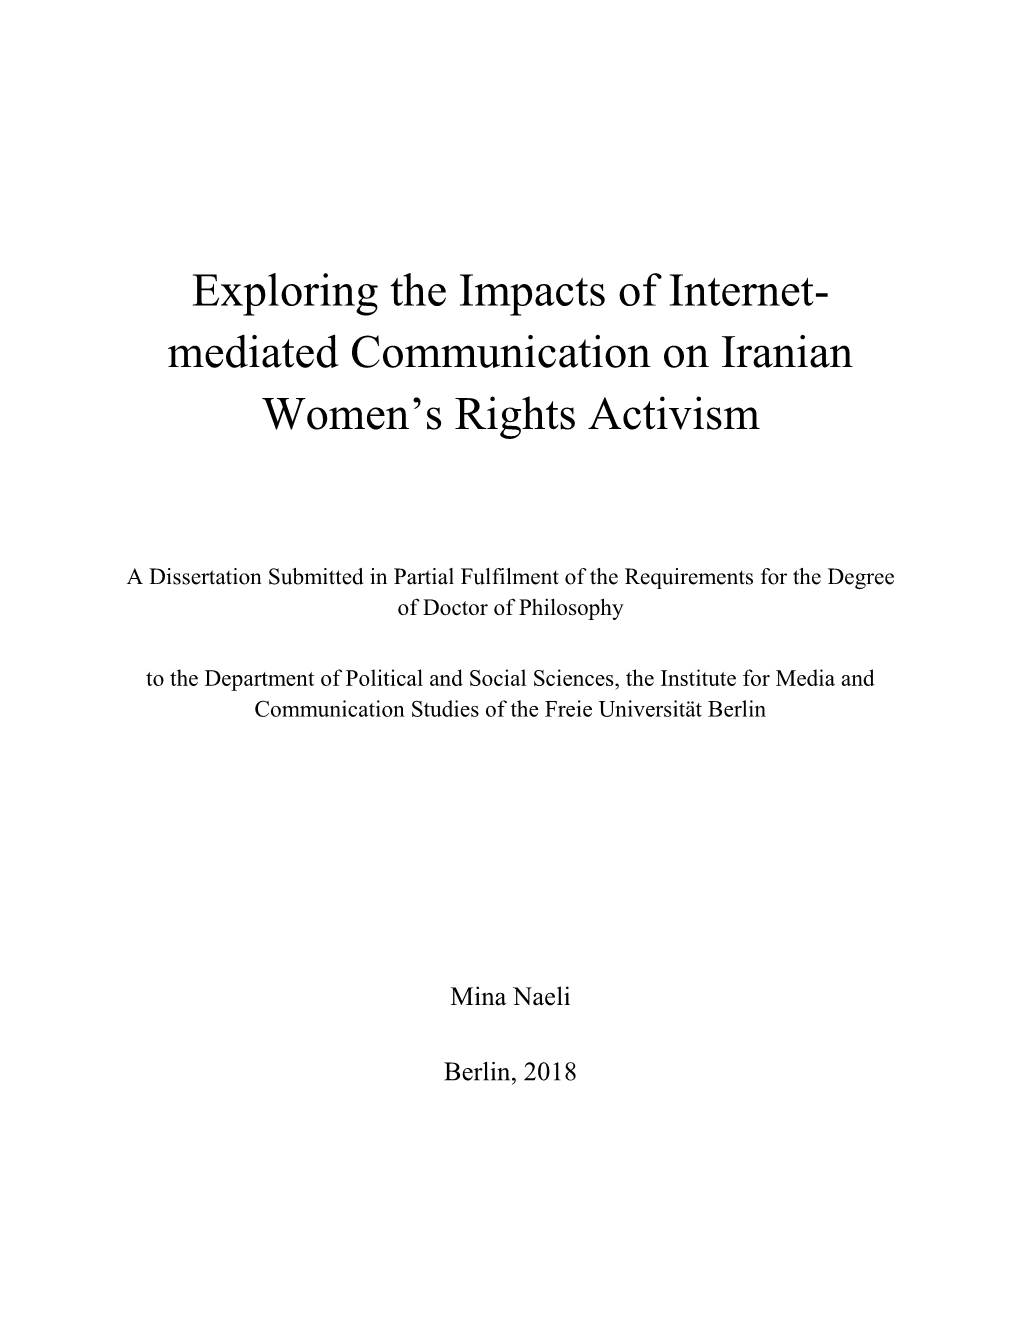 Exploring the Impacts of Internet-Mediated Communication